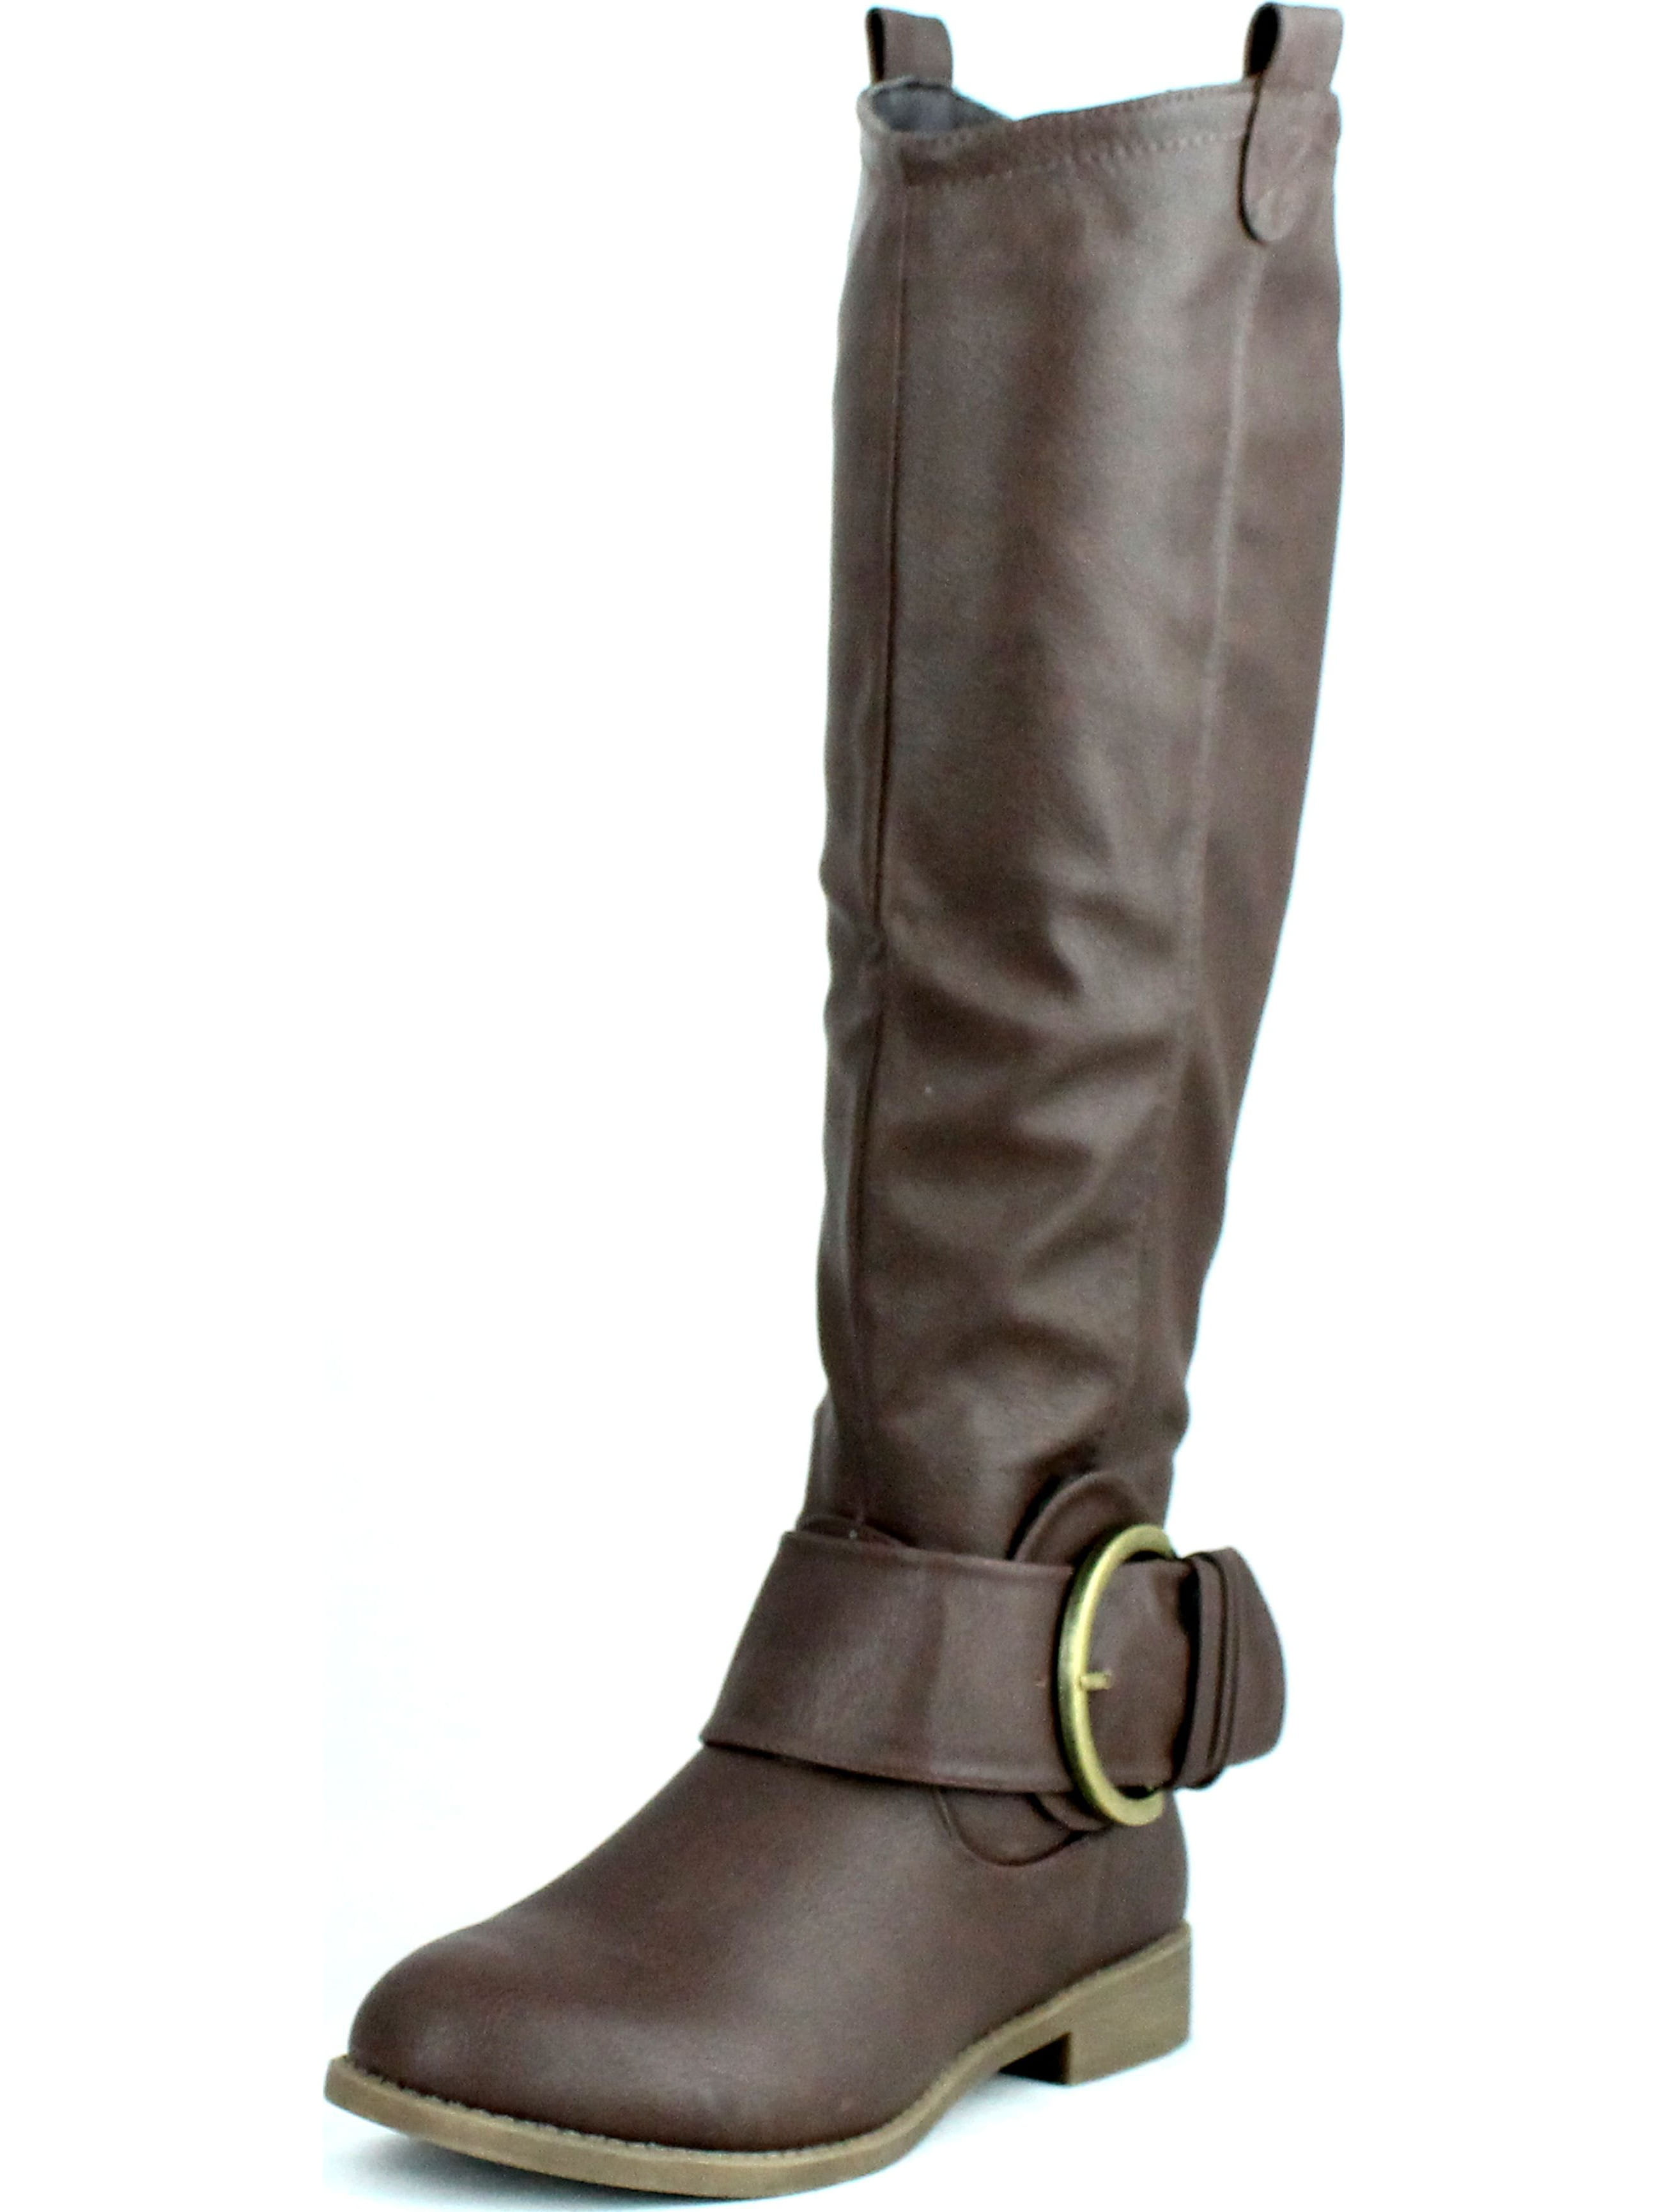 DBDK Womens Jencly-2 Knee High Riding 